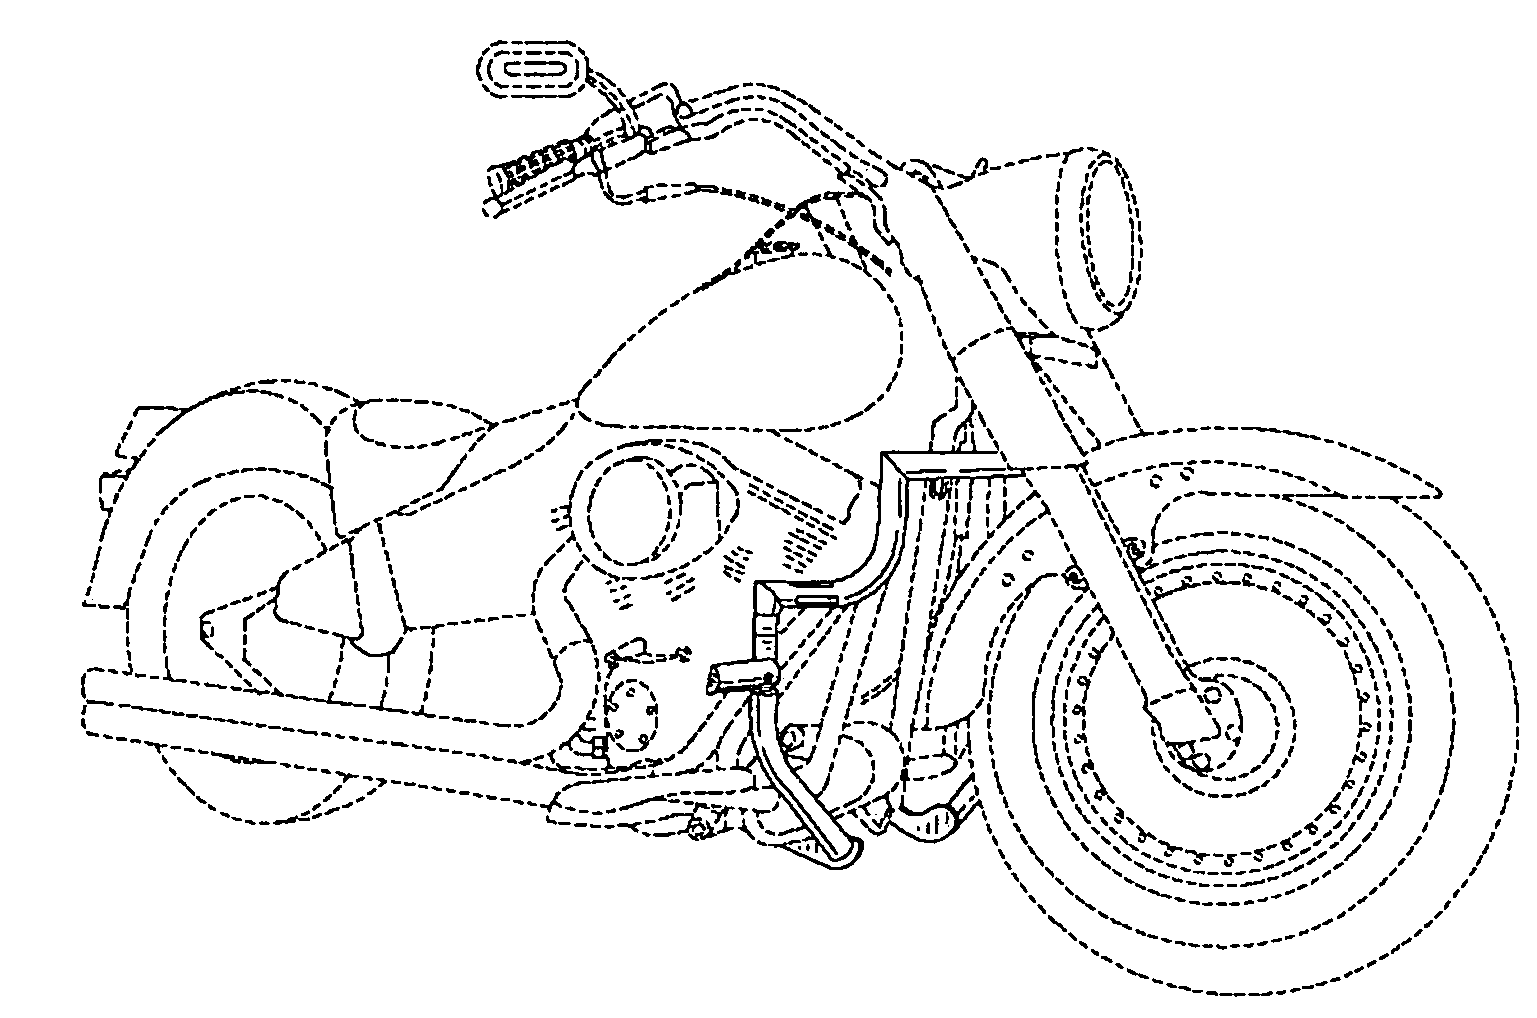 Motorcycle engine guard with retractable footrests